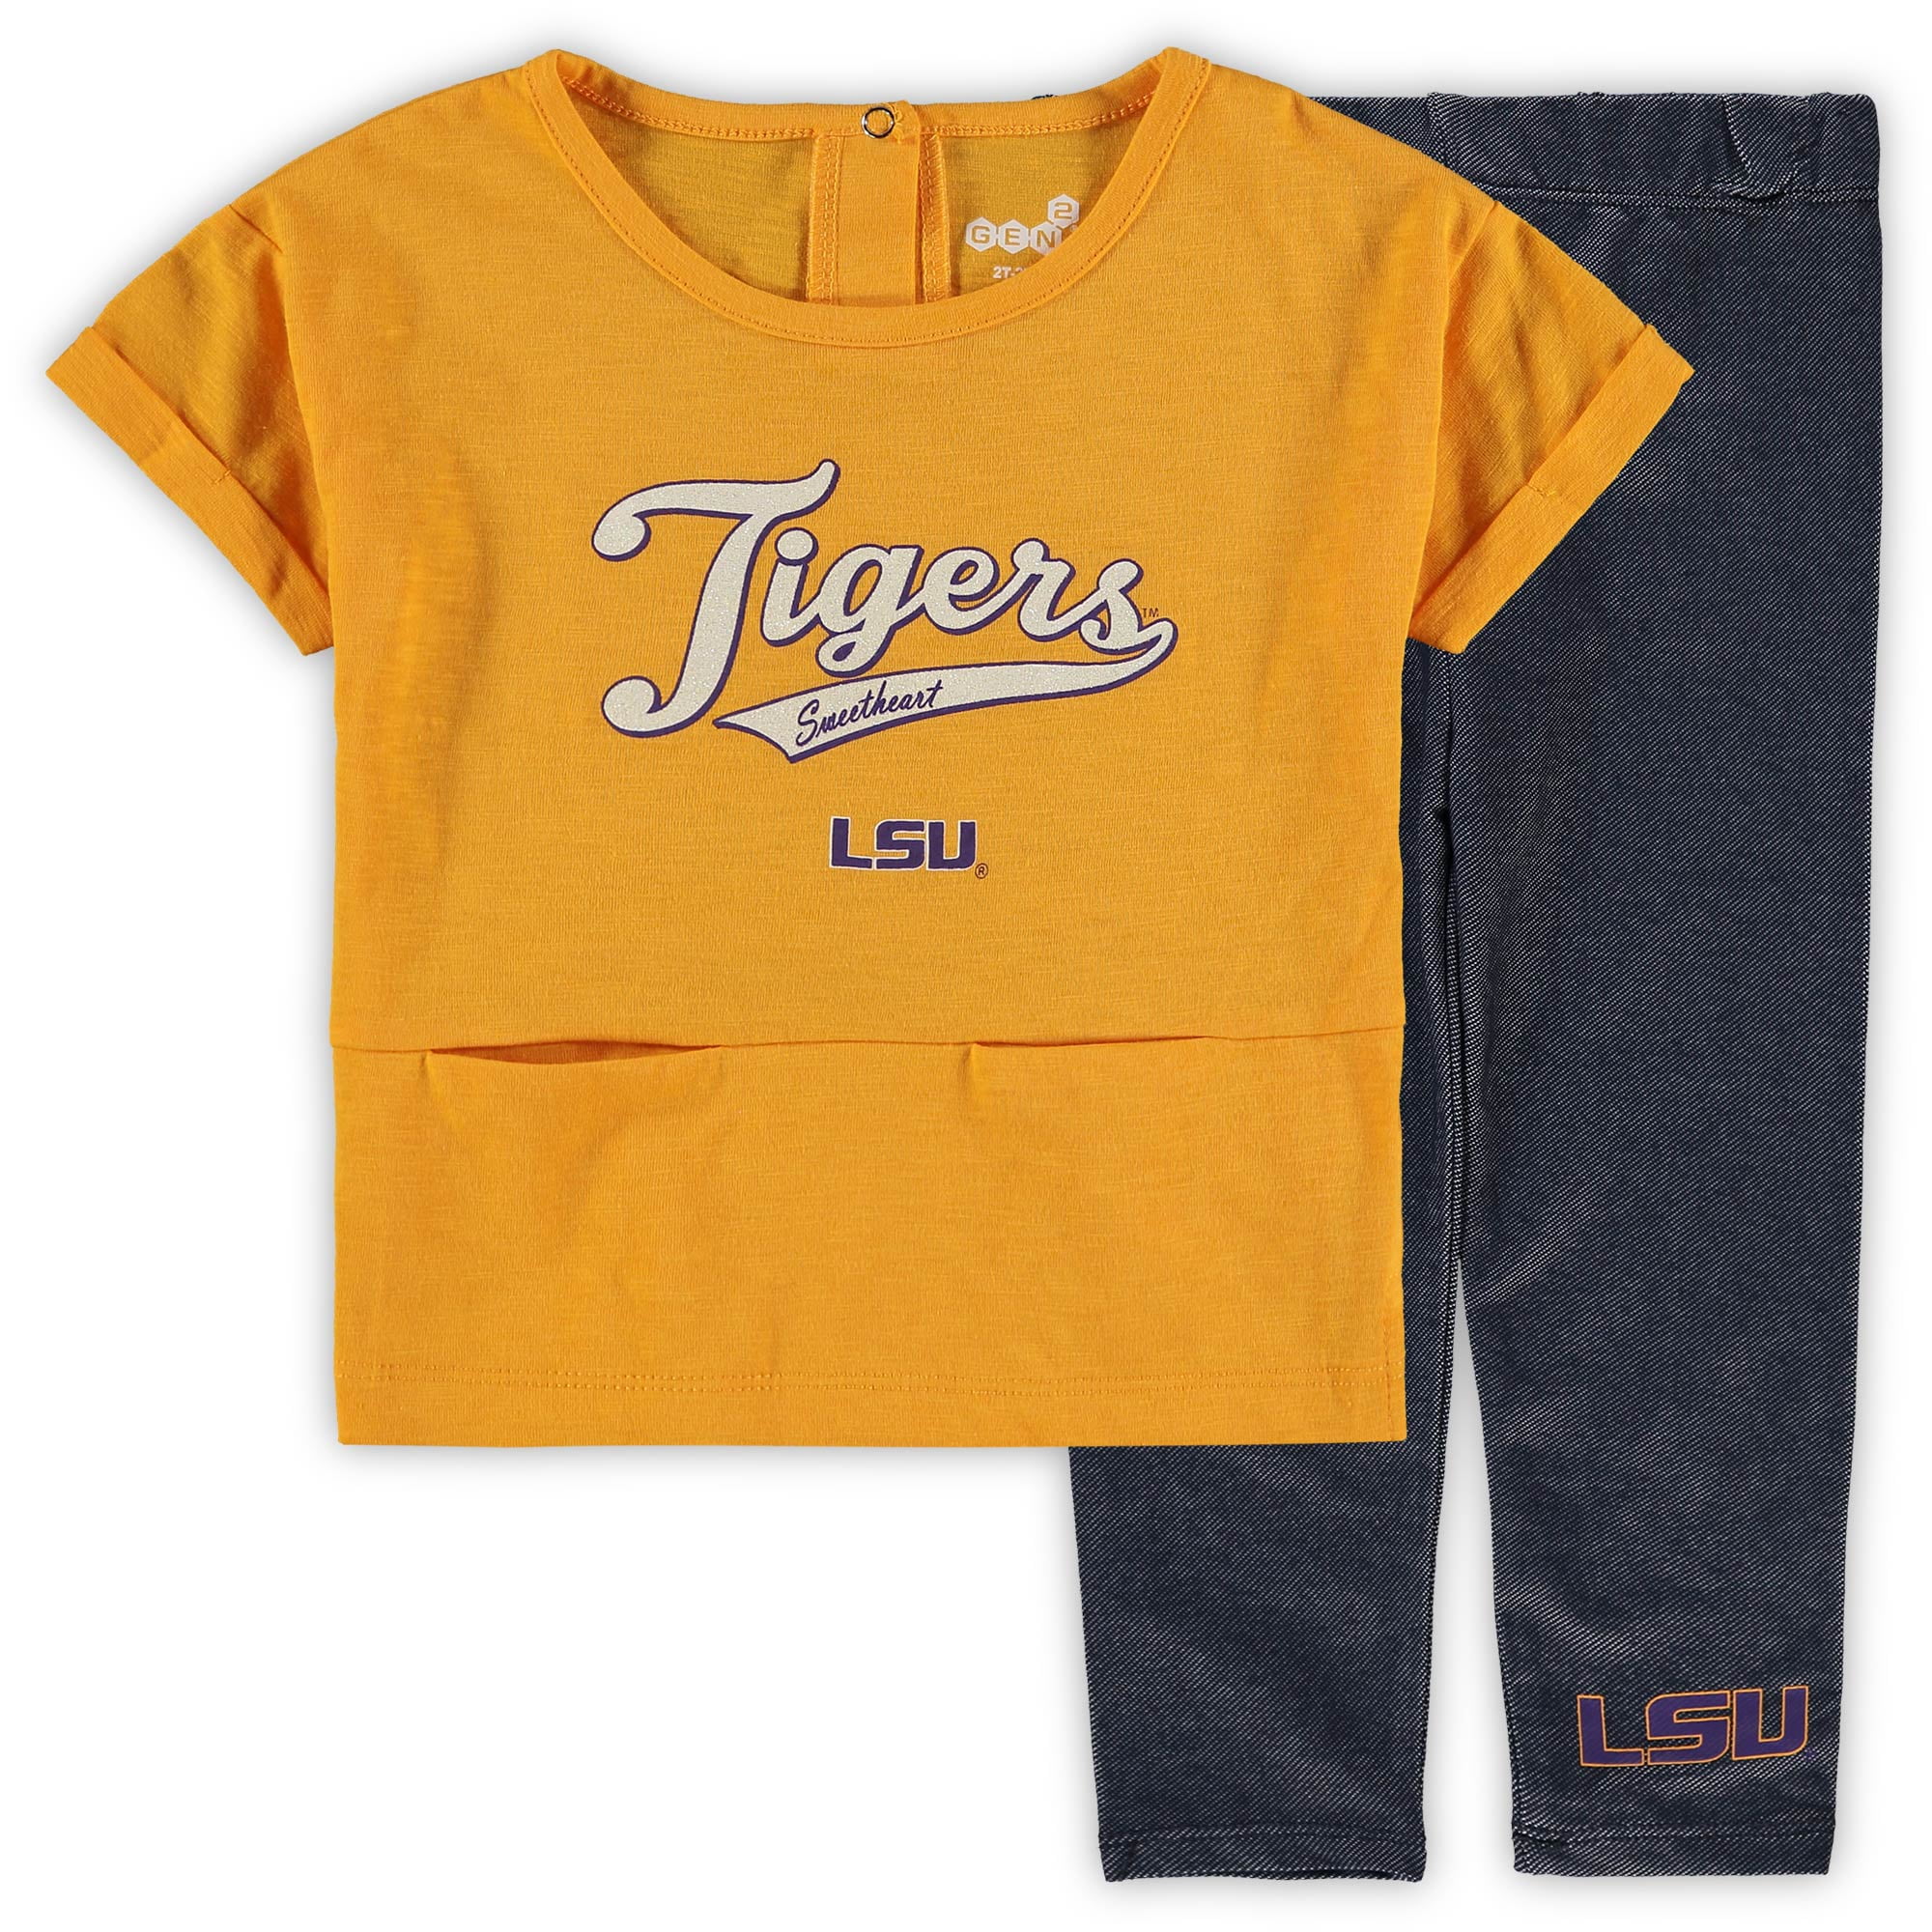 LSU TIGERS Toddler Jersey and Pant Outfit 3T 4T 3 T 4  Kids College Football NEW 